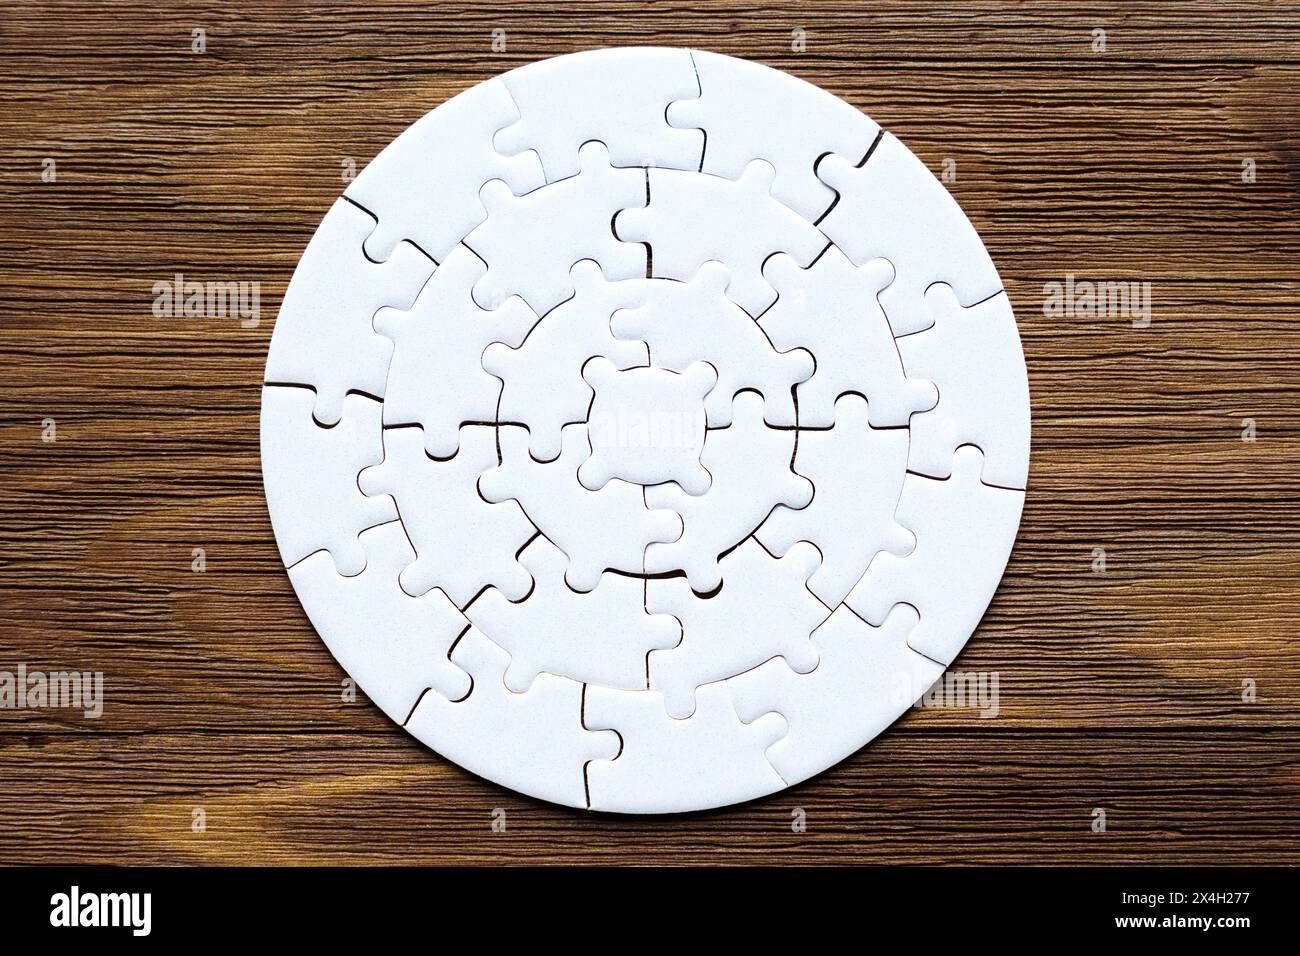 Blank circular jigsaw puzzle arranged on a wooden background with copy space. Stock Photo